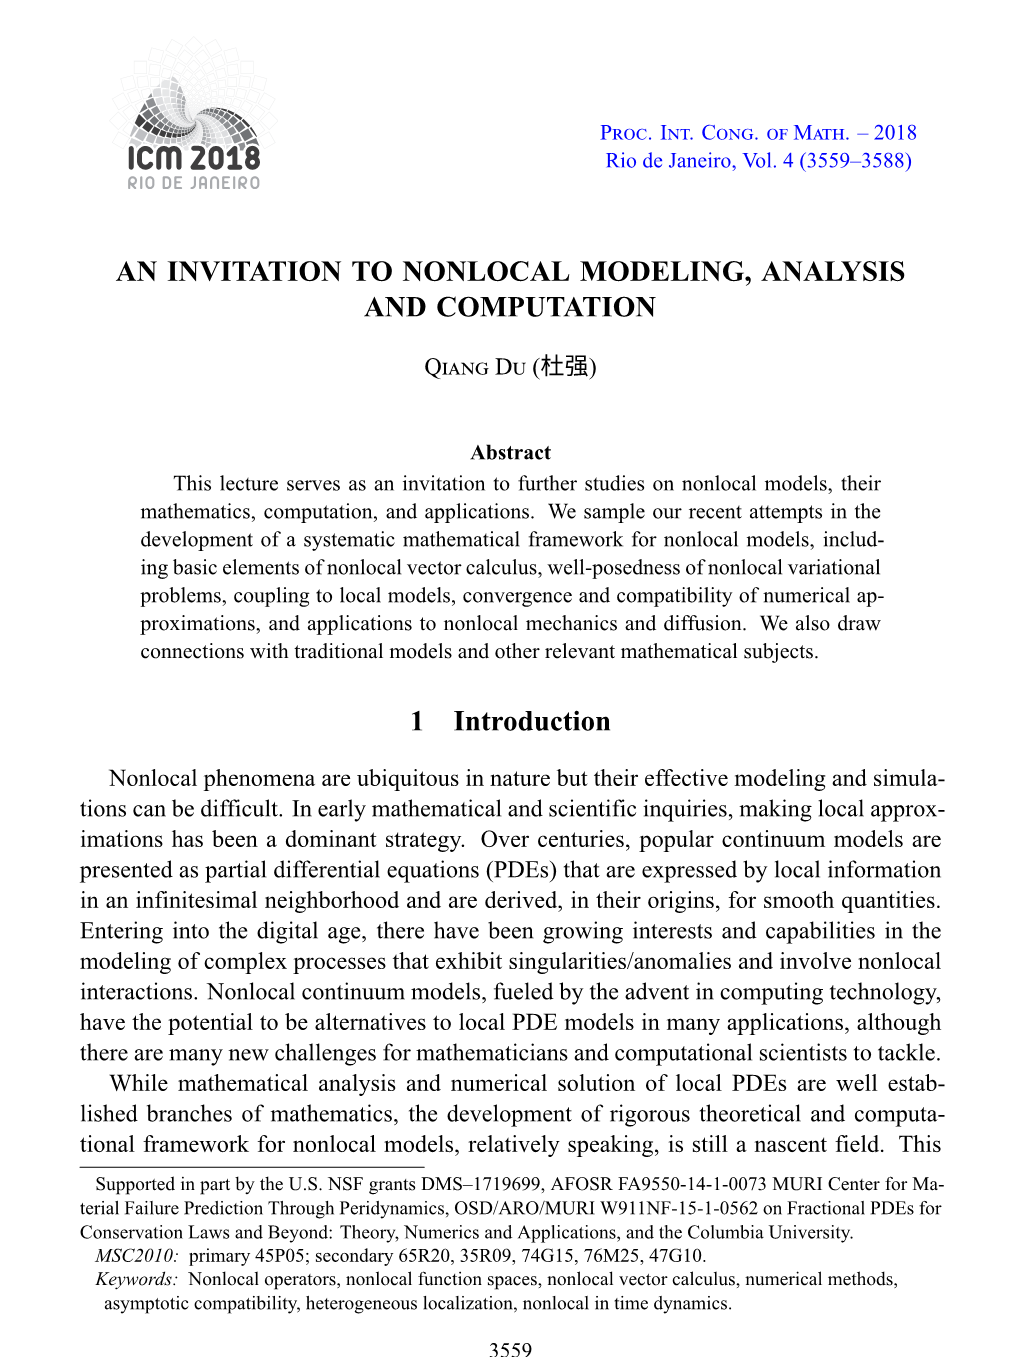 An Invitation to Nonlocal Modeling, Analysis and Computation